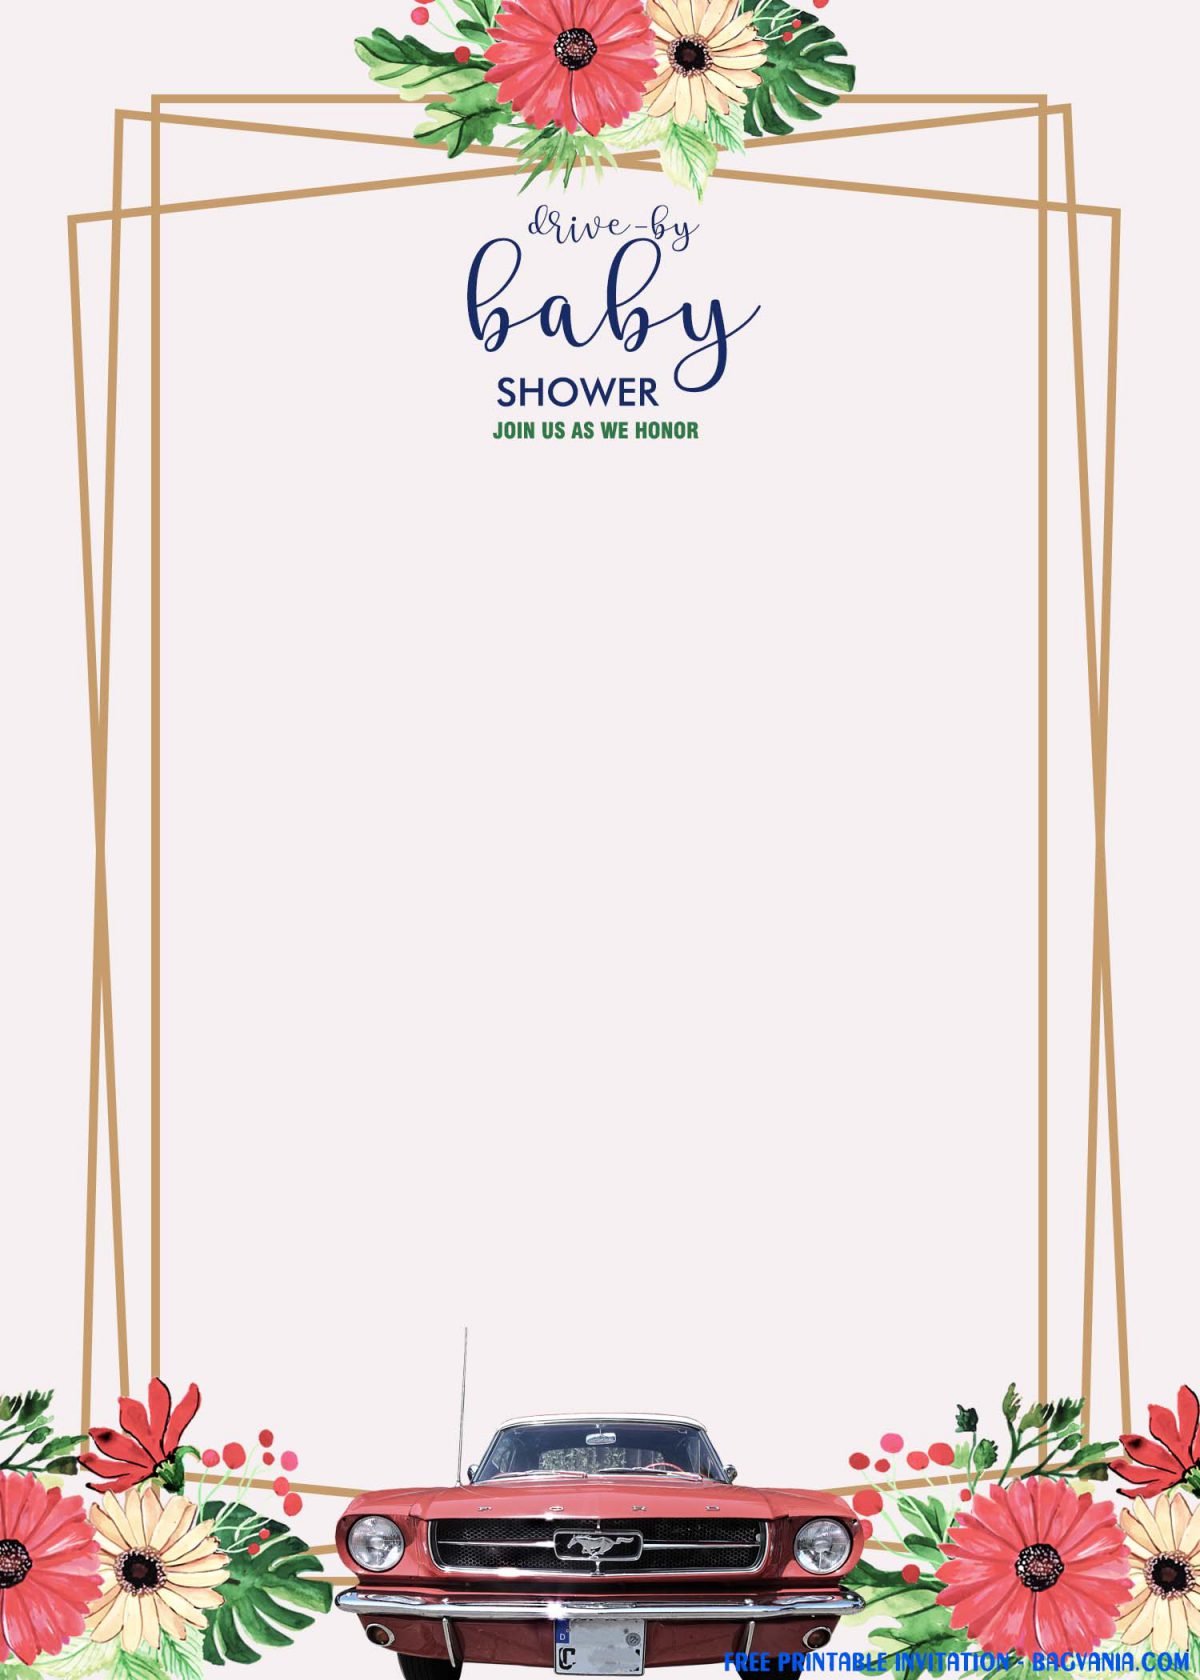 Free Printable Vintage Gold Drive By Baby Shower Invitation Templates With Classic Car Image